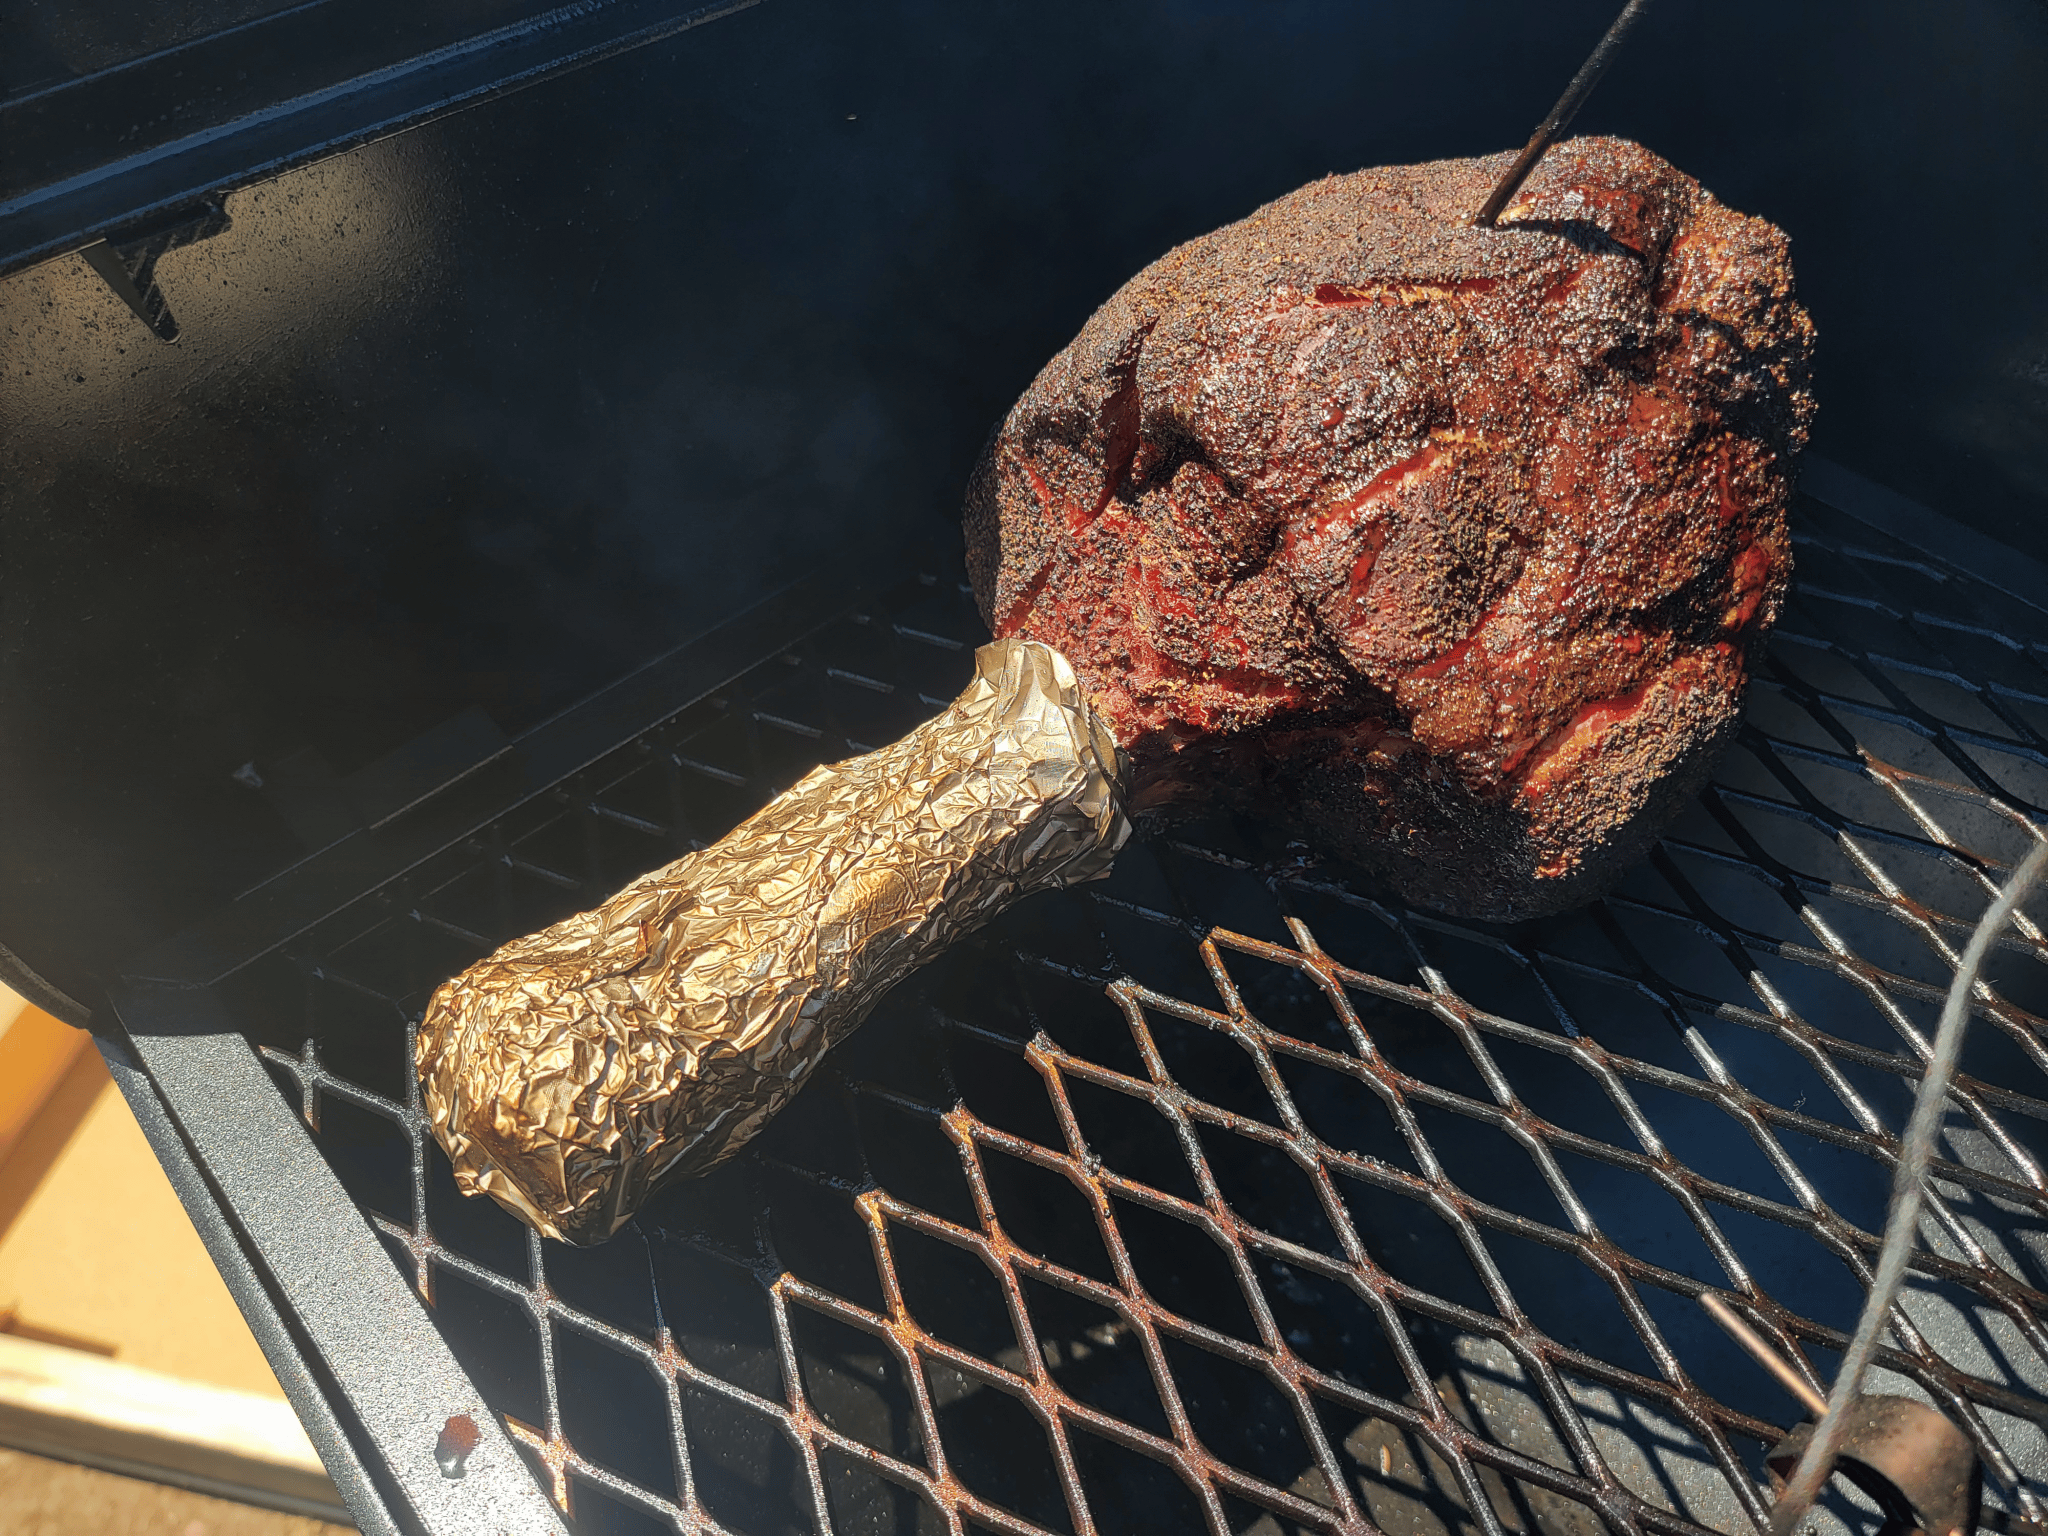 a frenched beef shin on the grill grate